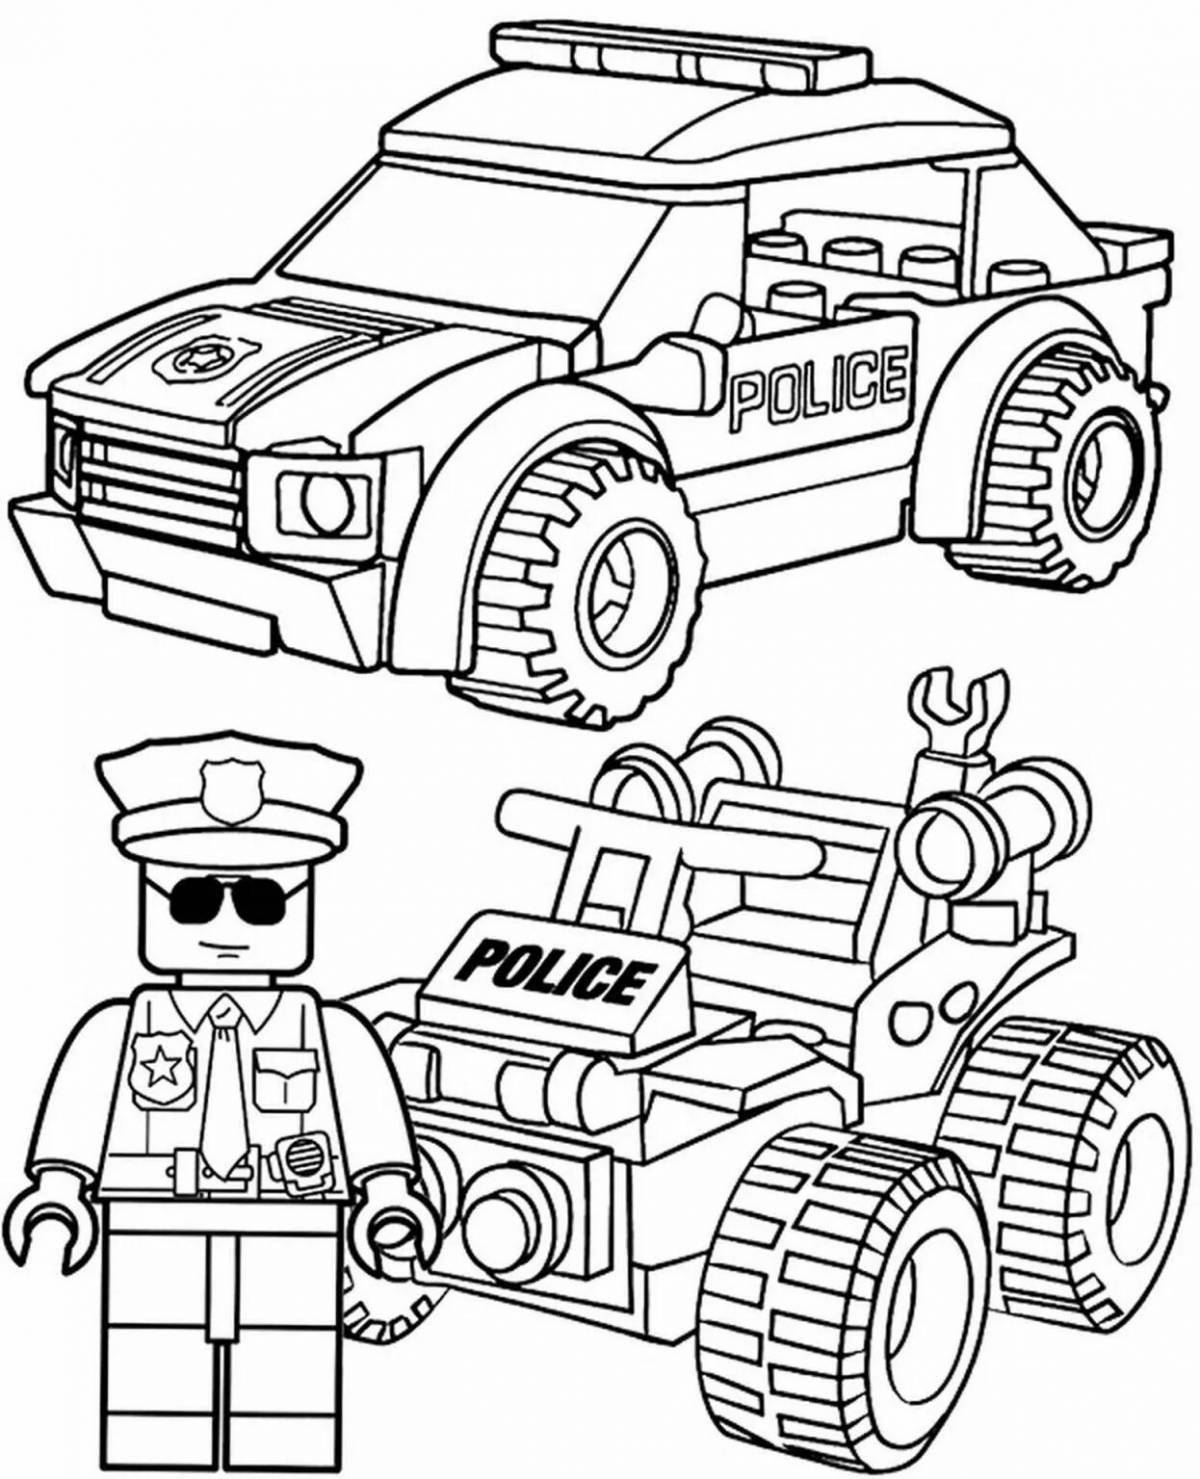 Amazing police car coloring book for kids 5-6 years old